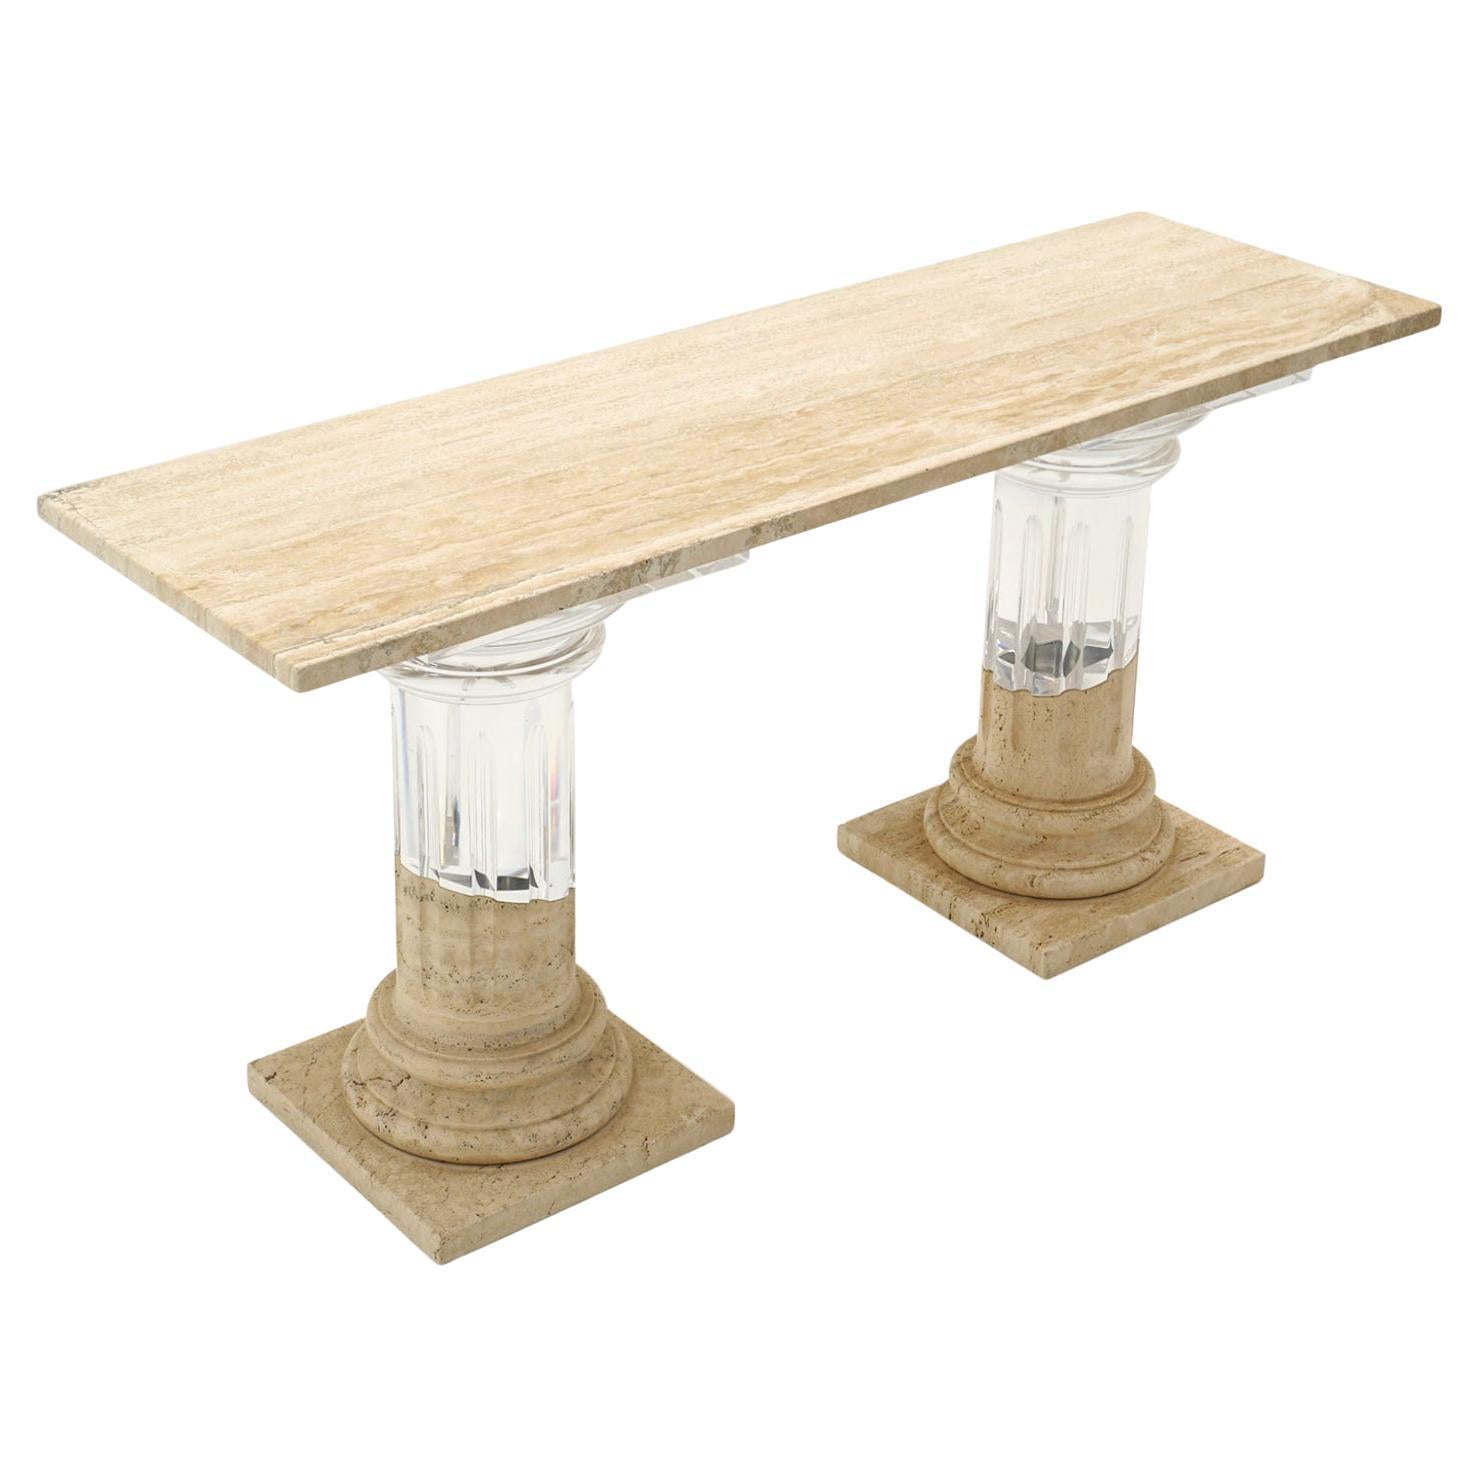 Sofa / Console Table in Travertine and Acrylic by Fabian Decoration, Rome, Italy For Sale